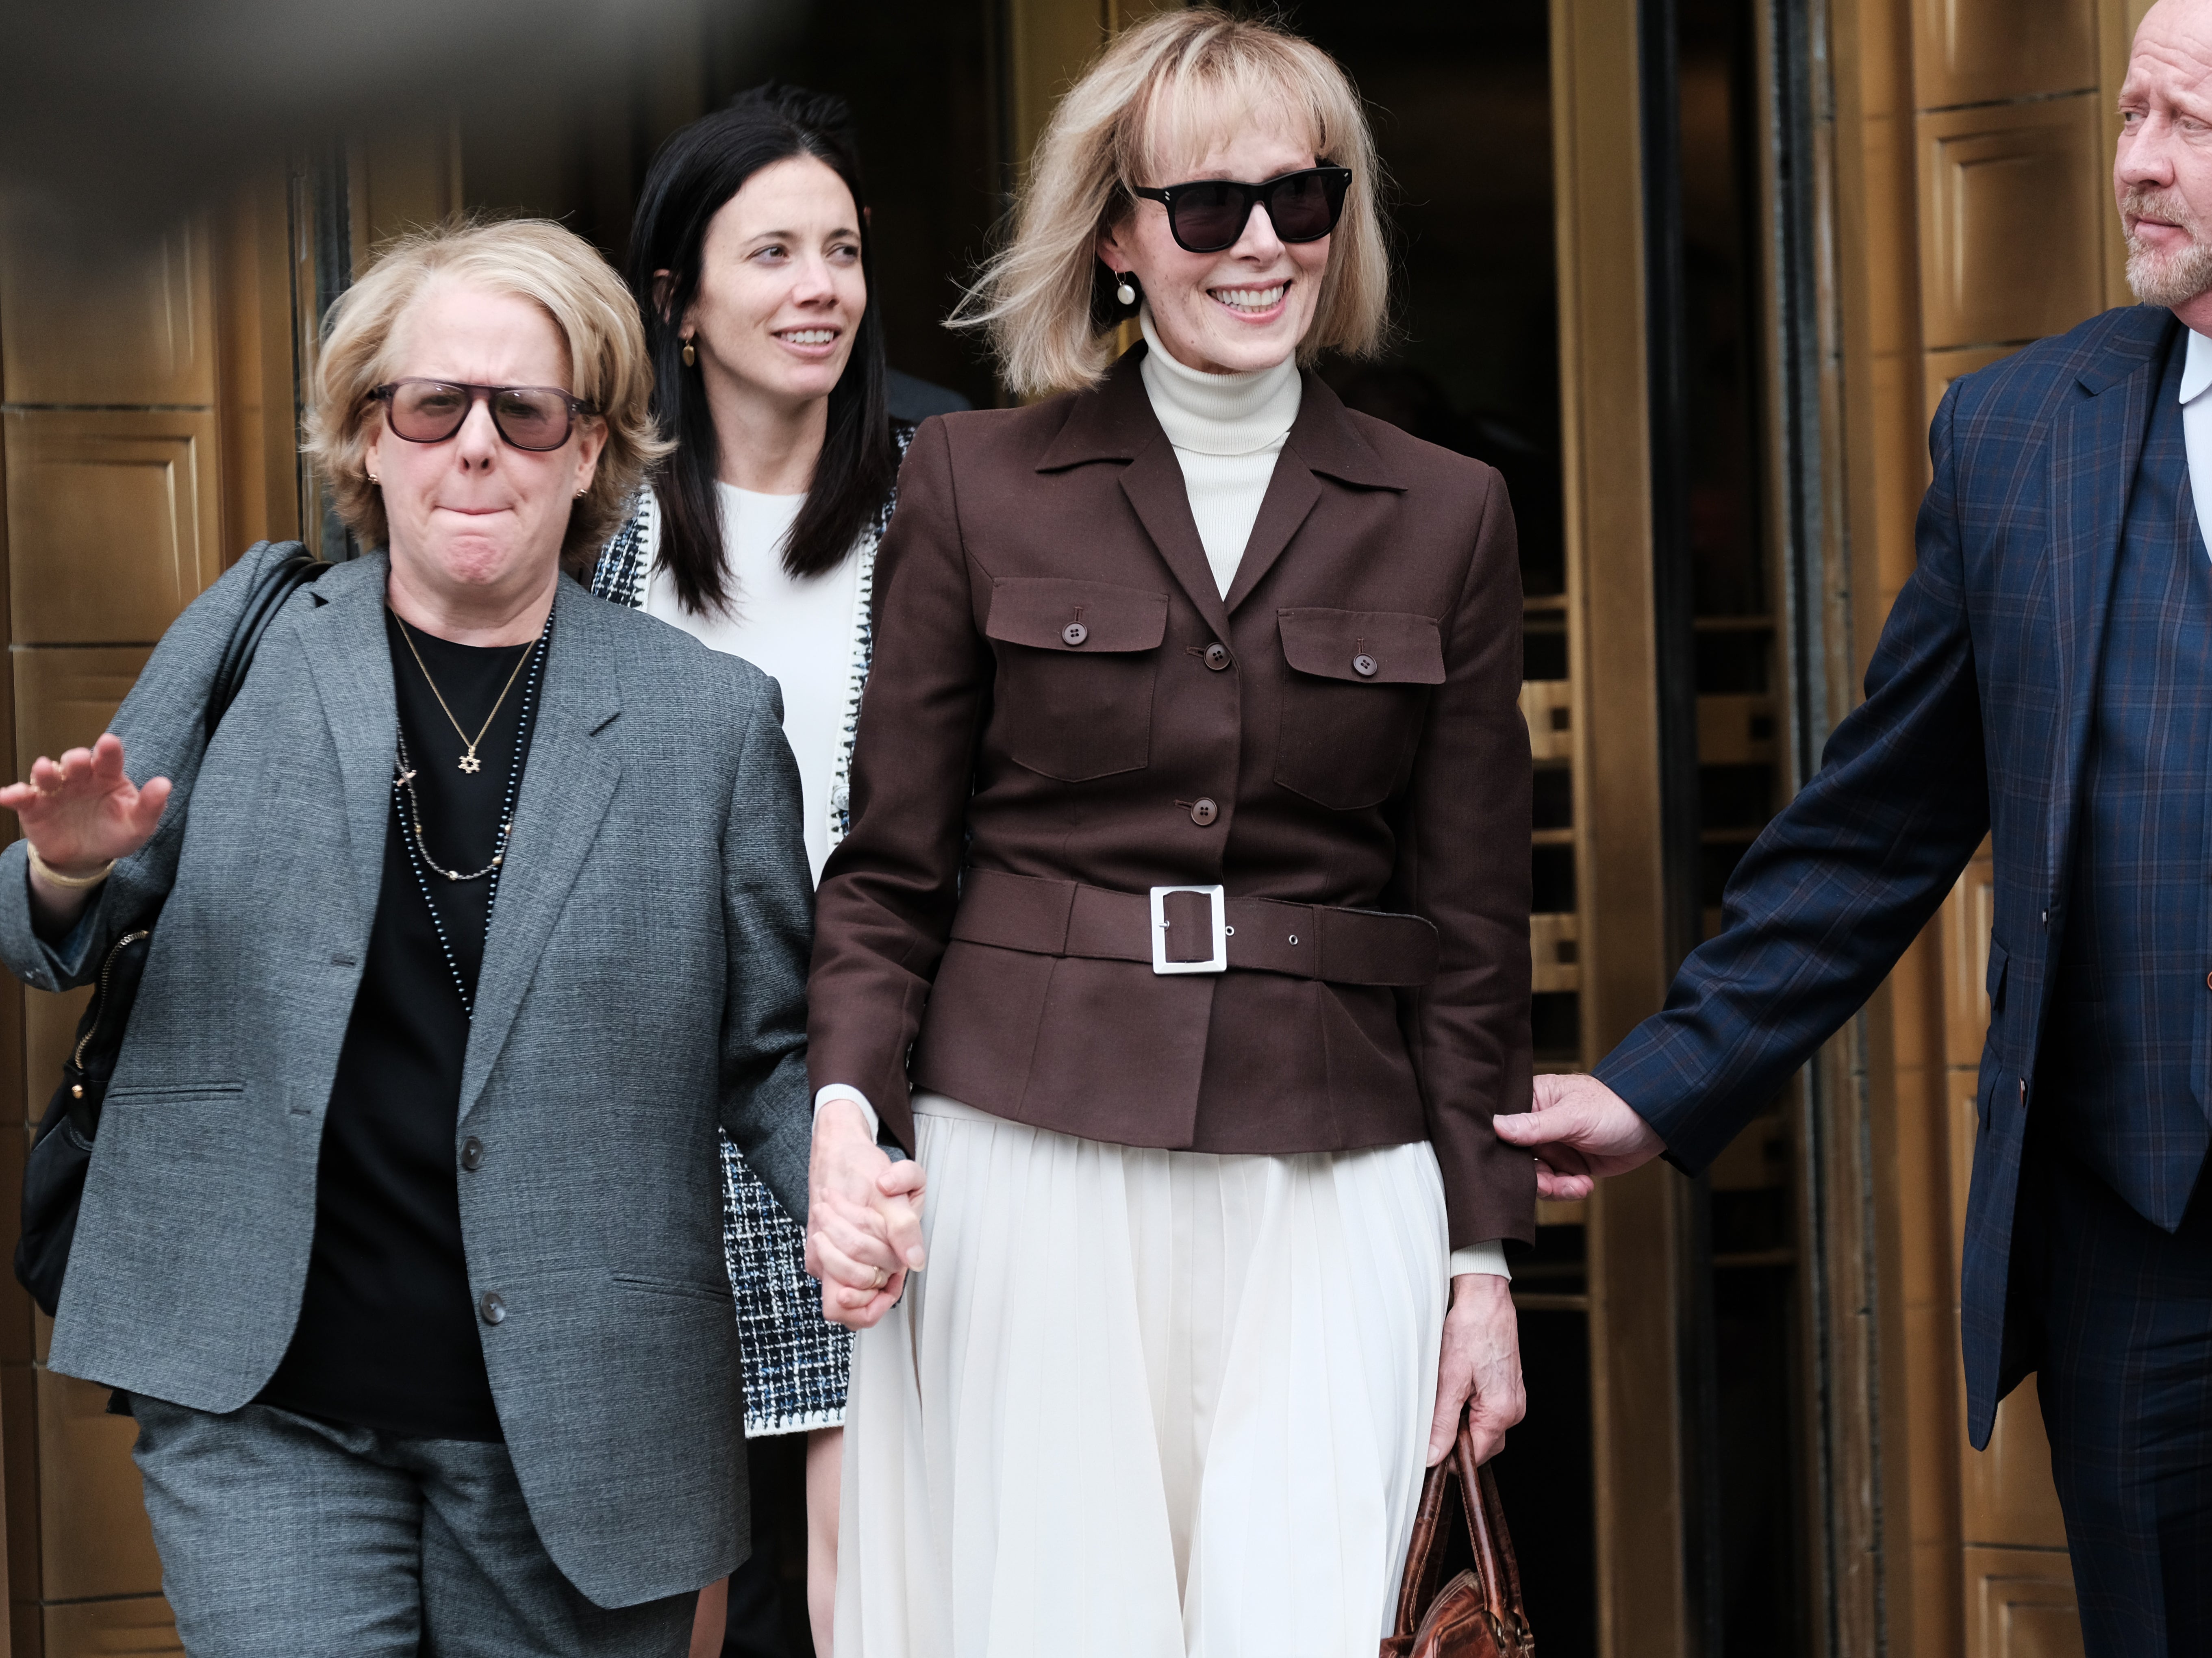 E Jean Carroll (center) leaves a Manhattan courthouse after a jury found Donald Trump liable for sexually abusing her in a Manhattan department store in the 1990s on 9 May 2023 in New York City